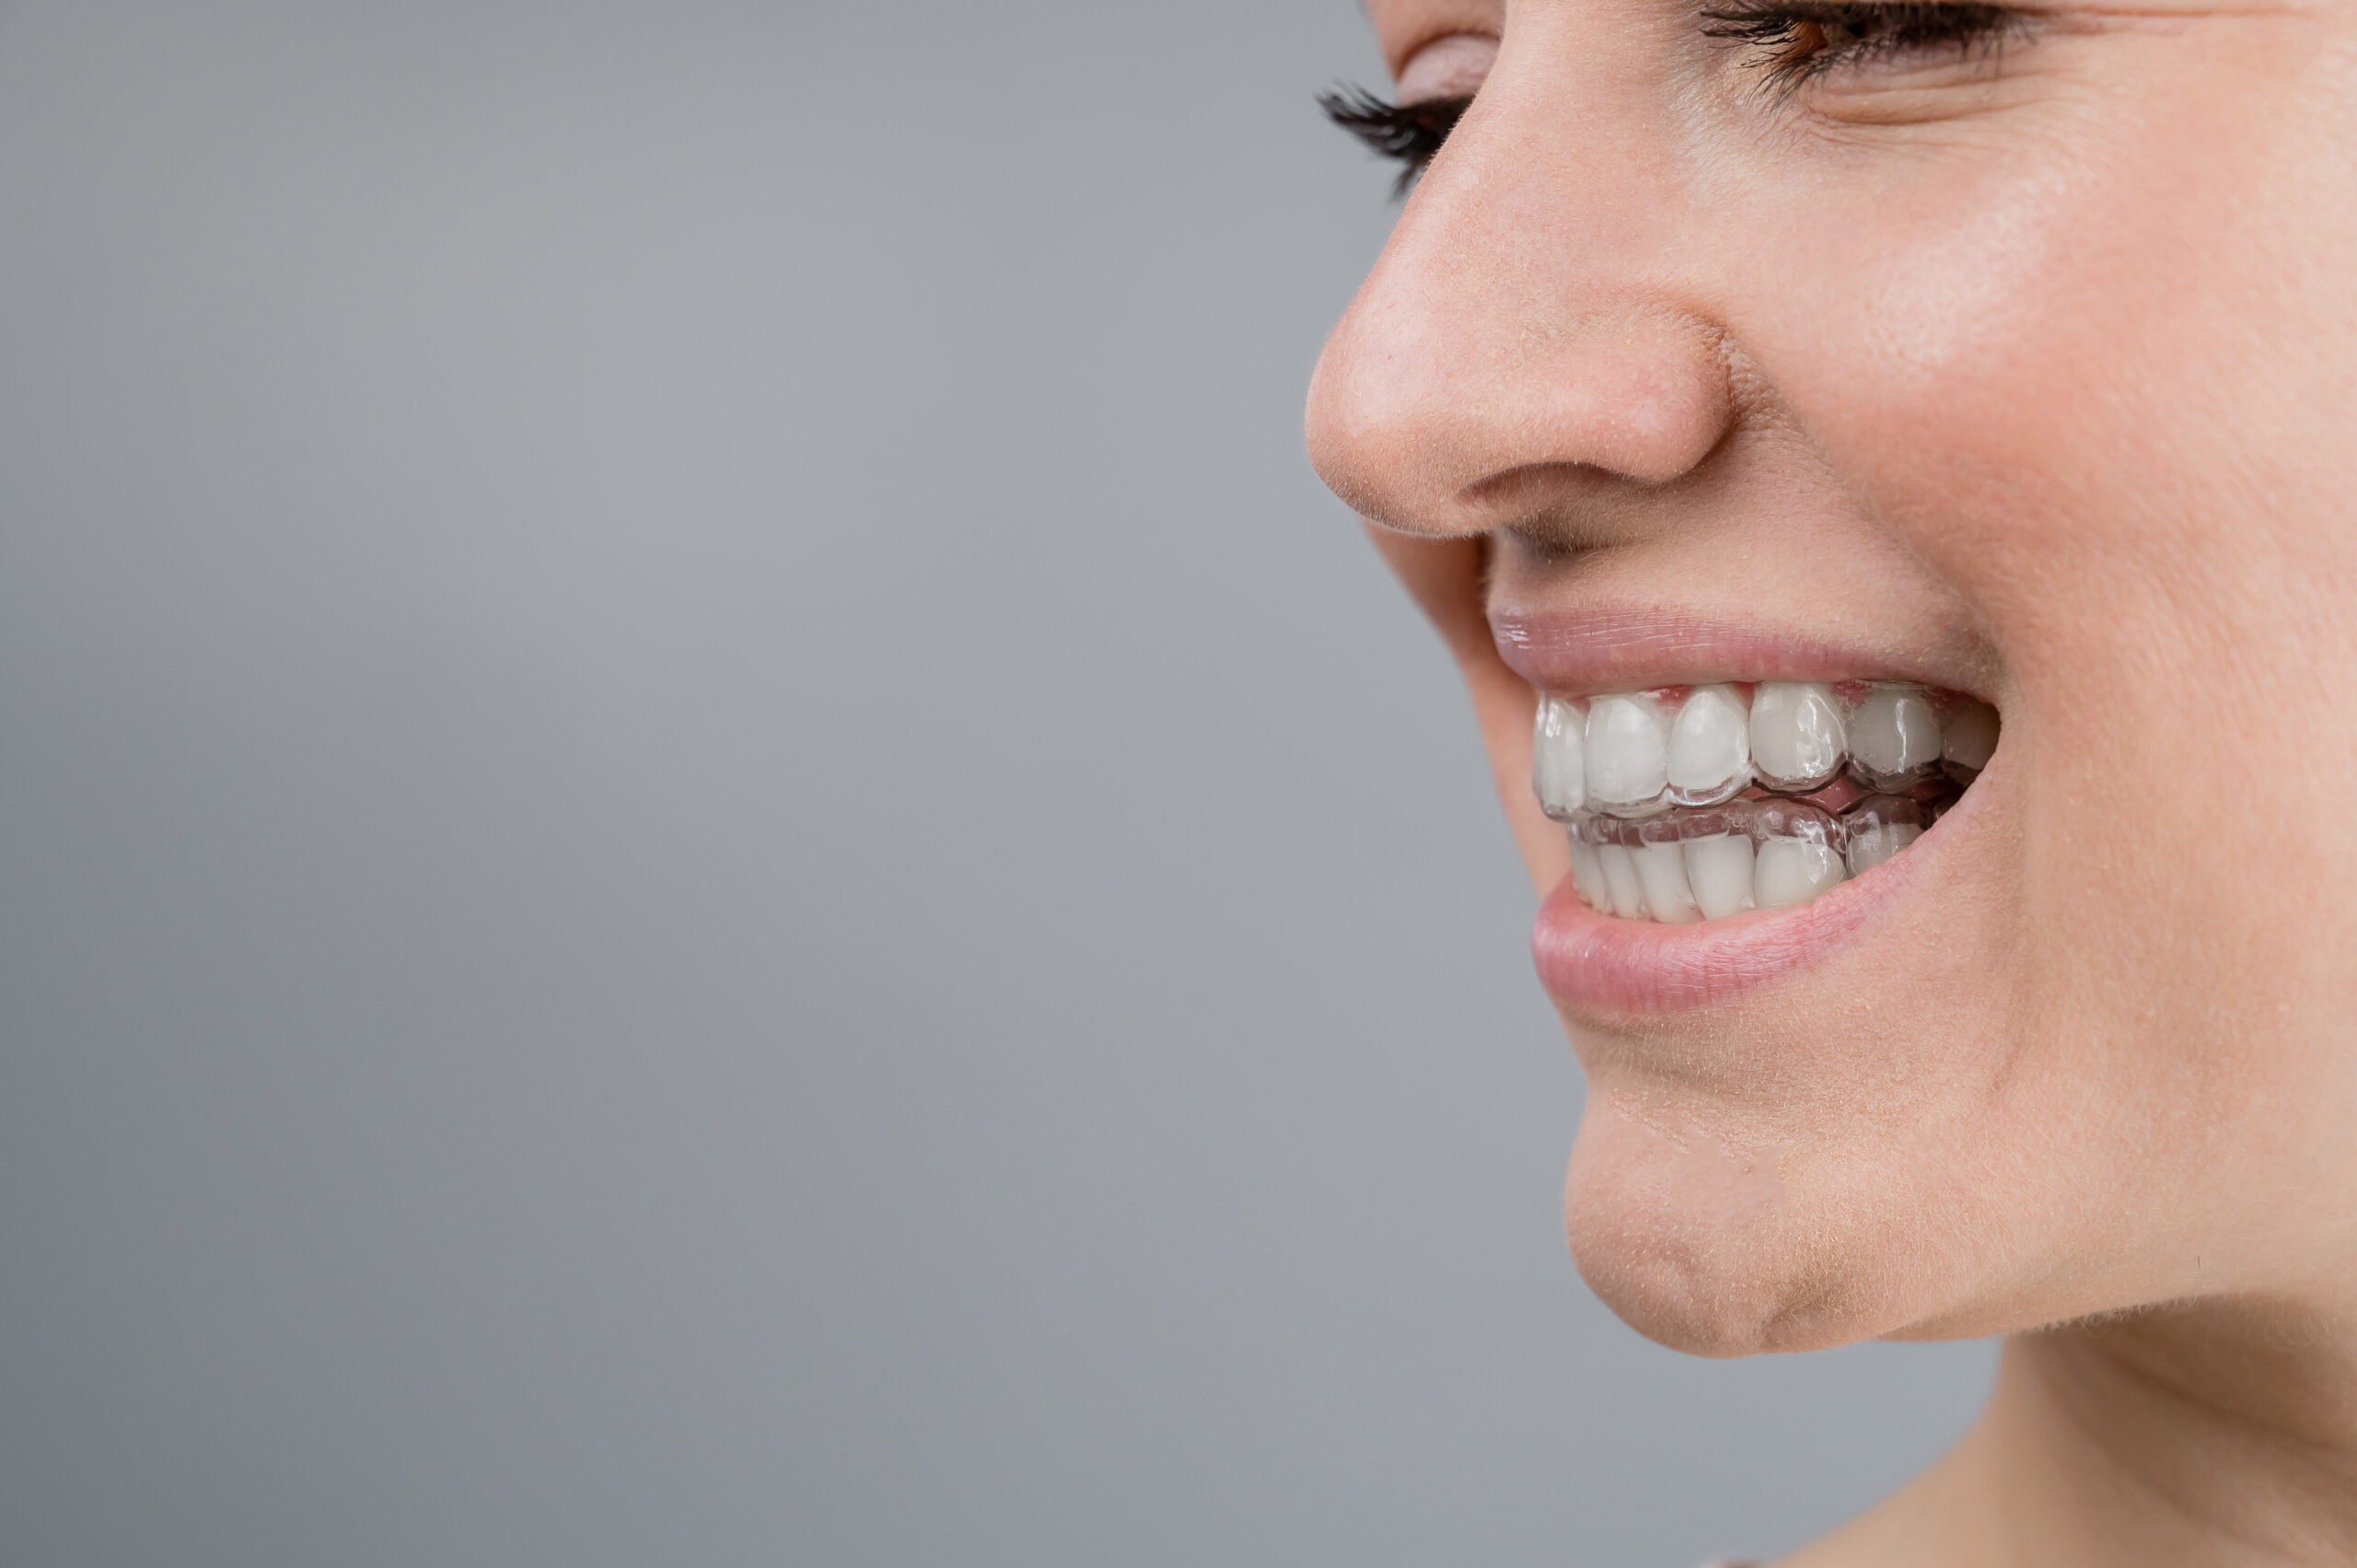 Trends in Cosmetic Dentistry